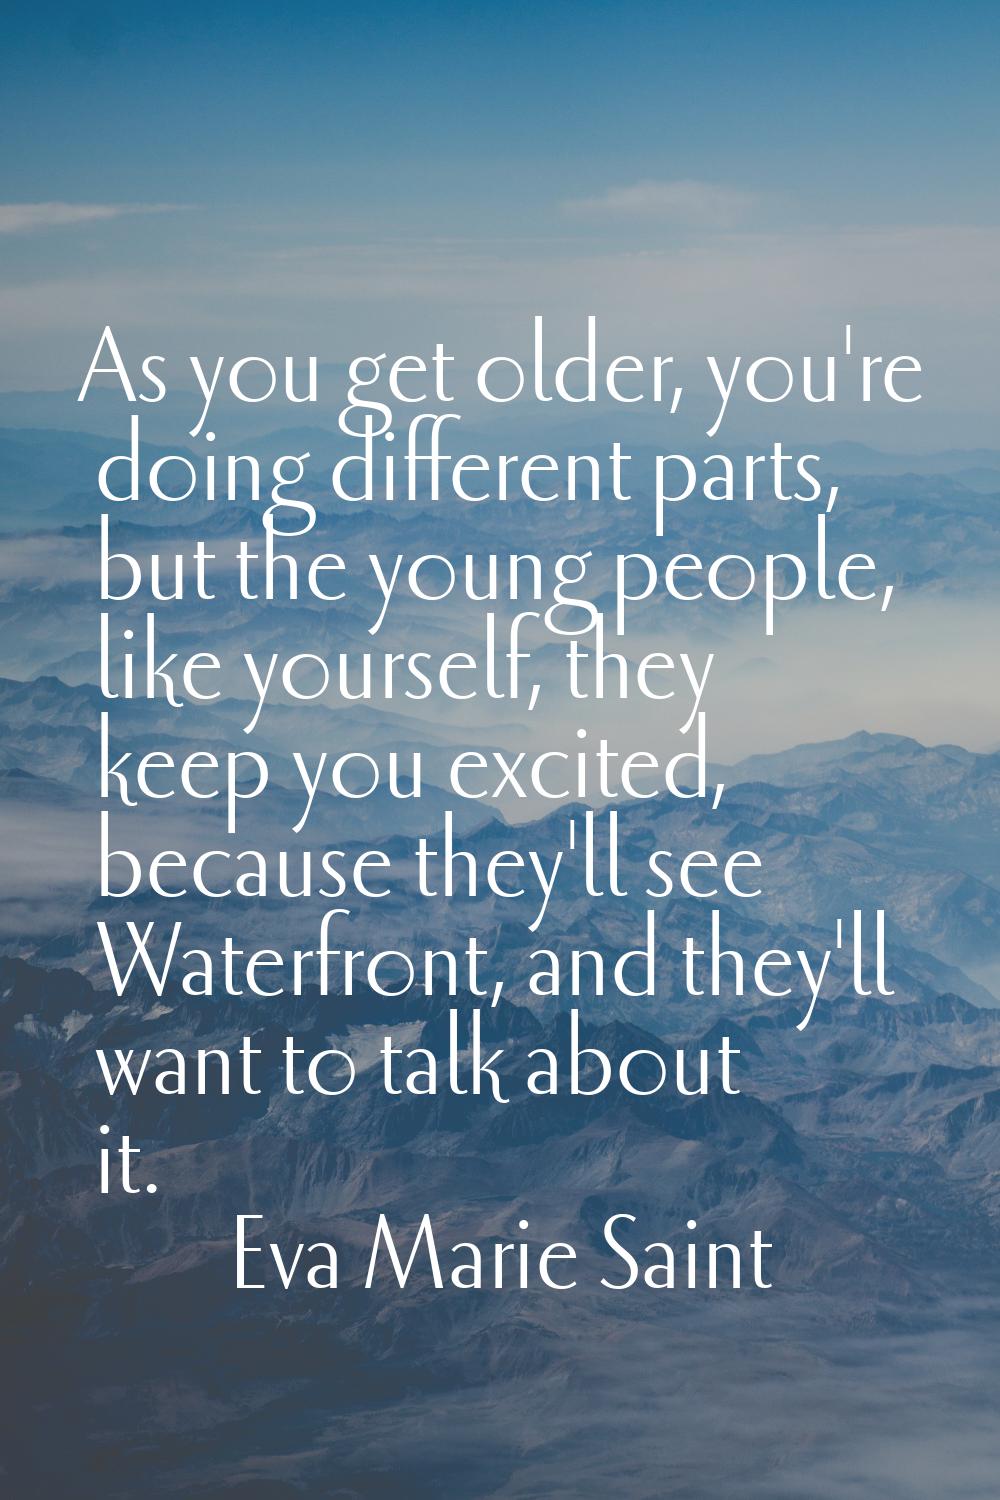 As you get older, you're doing different parts, but the young people, like yourself, they keep you 